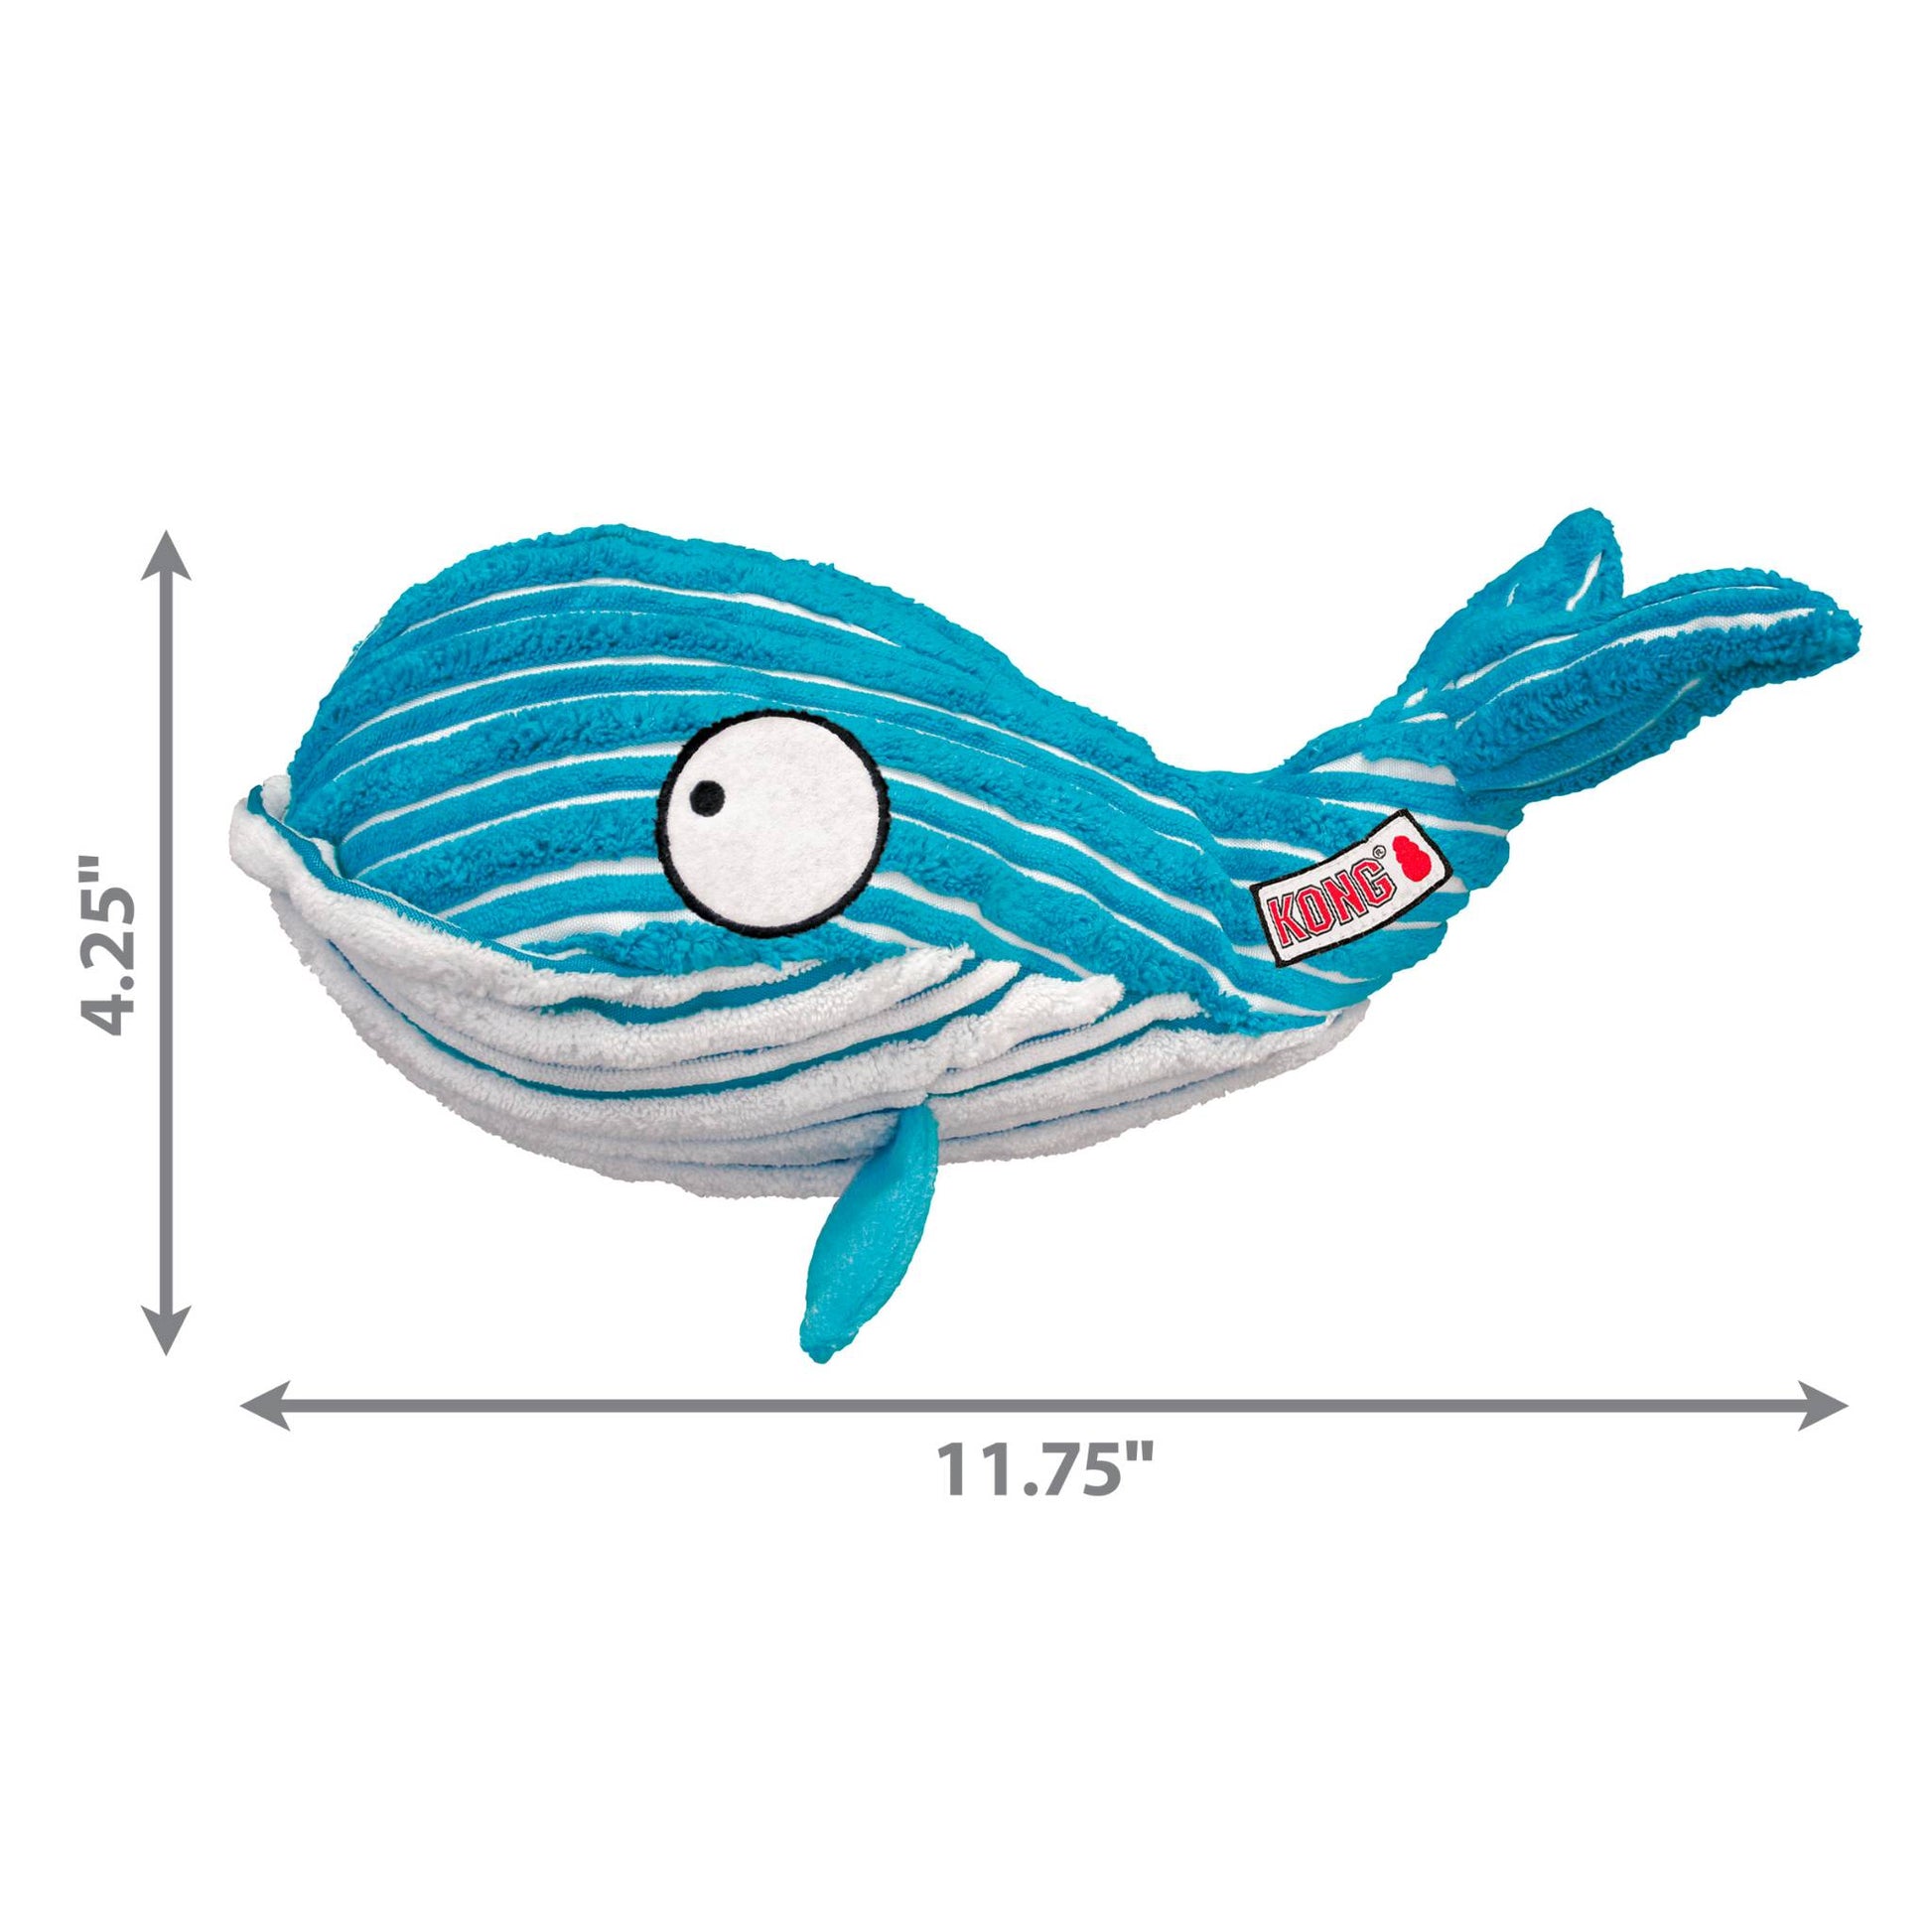 kong soft whale toy measurements